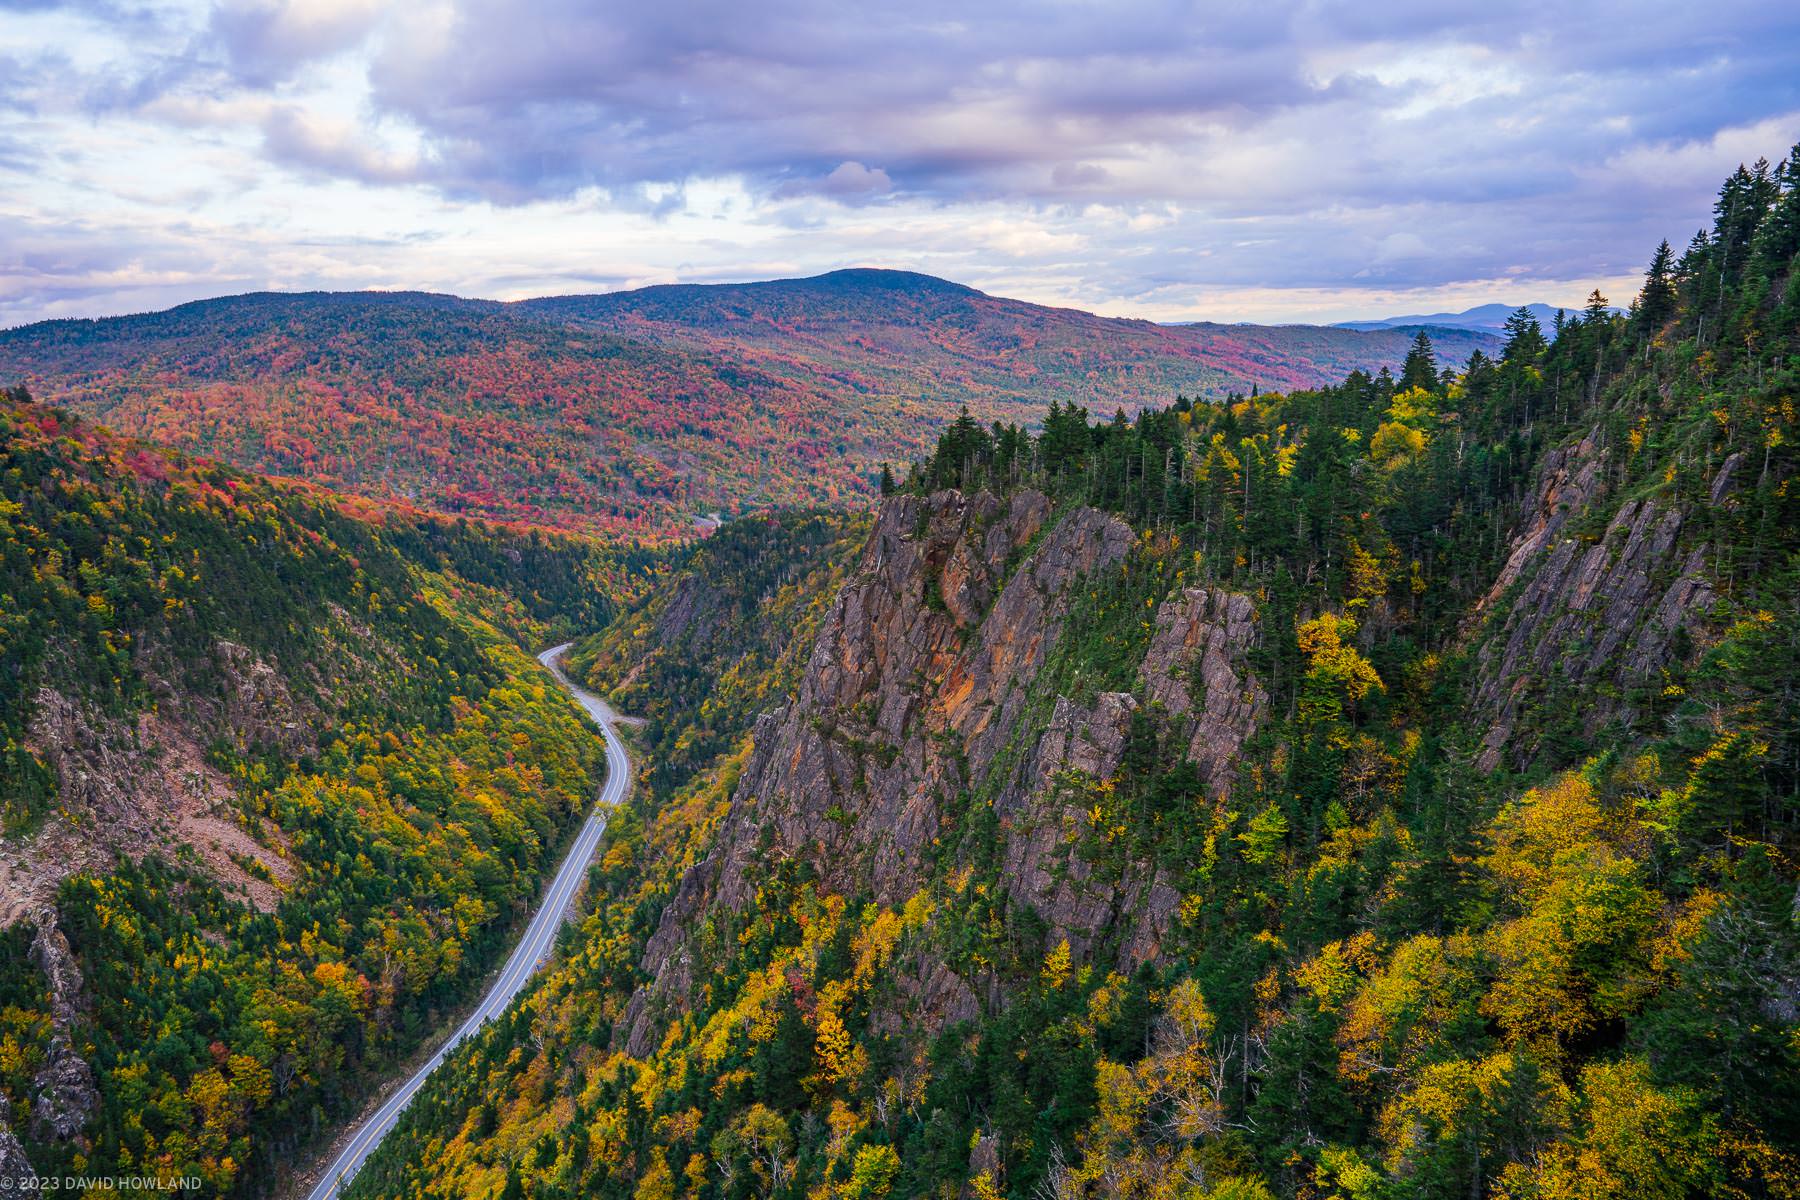 A photo of a road cutting through a steep notch in the mountains of northern New Hampshire at peak fall foliage